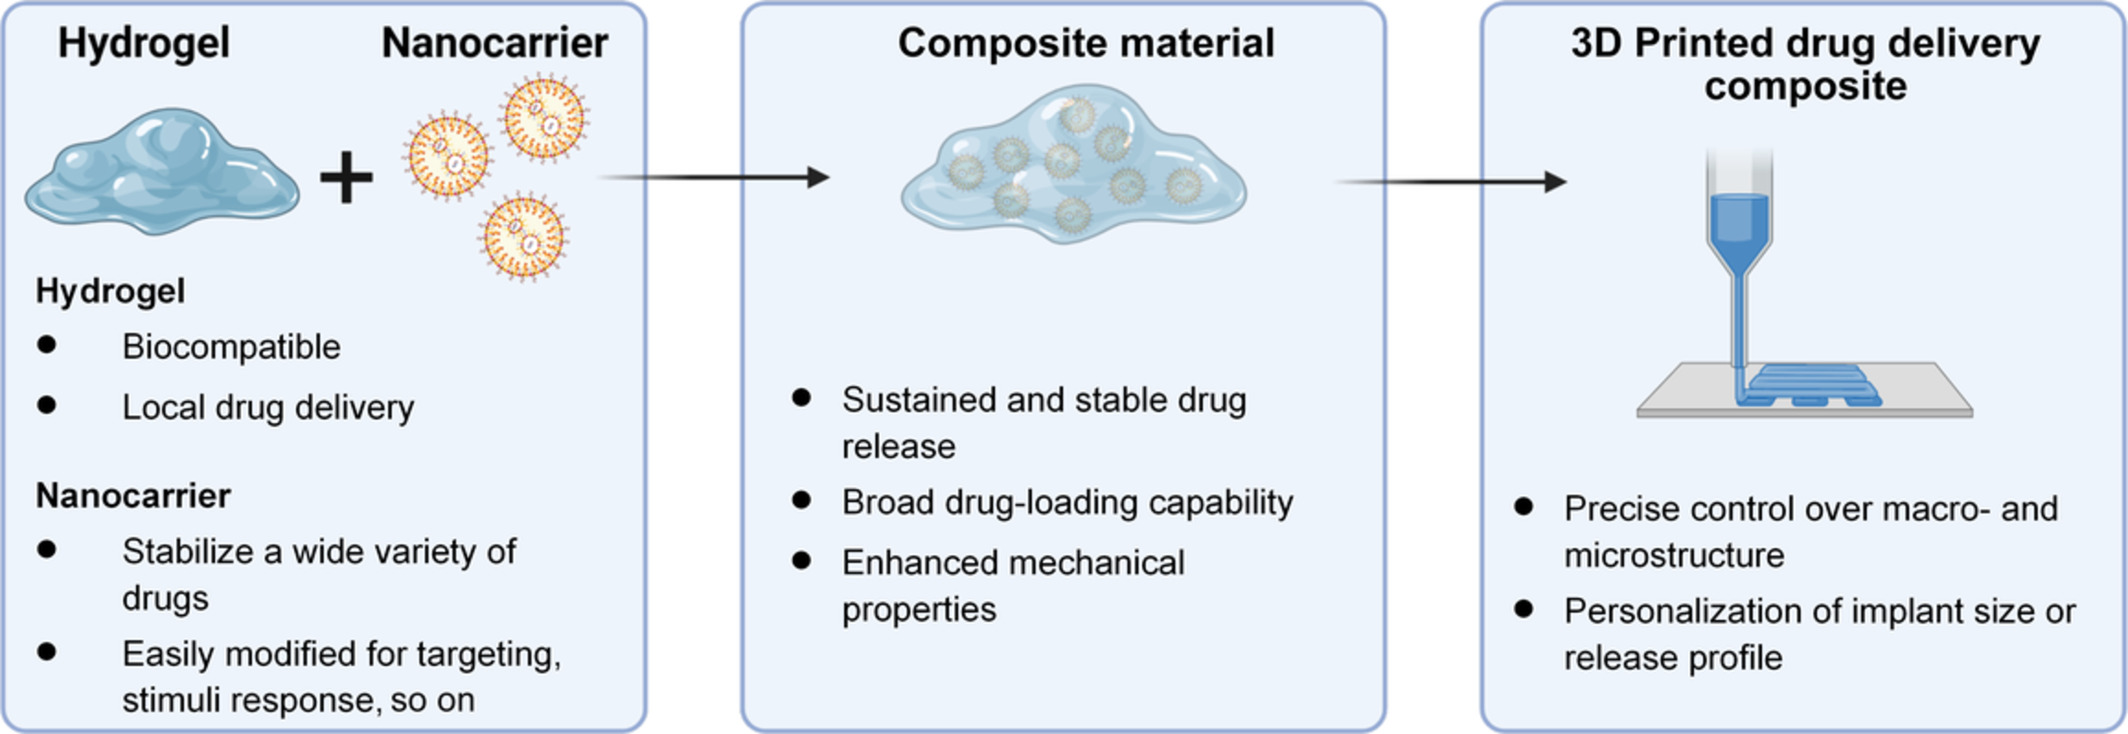 Nanocarrier‐hydrogel composite delivery systems for precision drug release